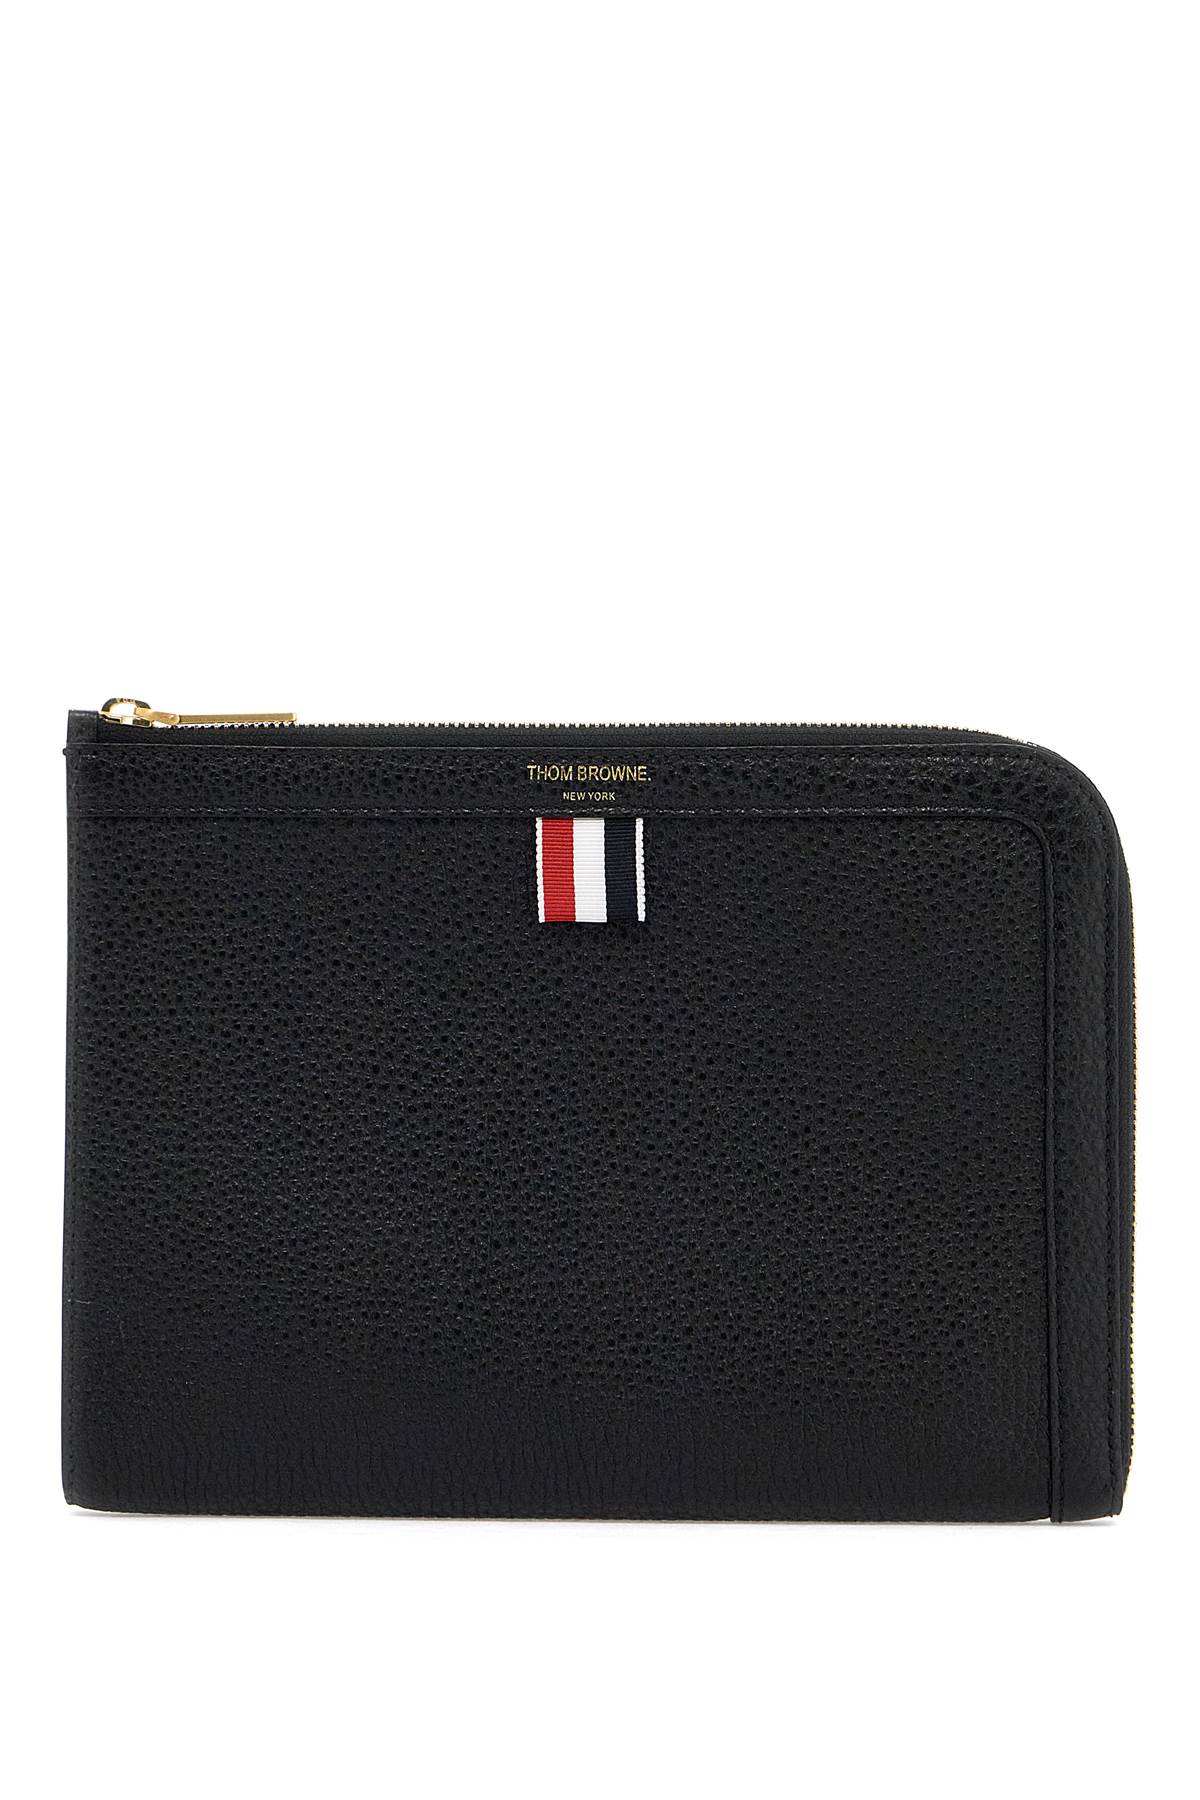 Thom Browne THOM BROWNE "embossed leather pouch